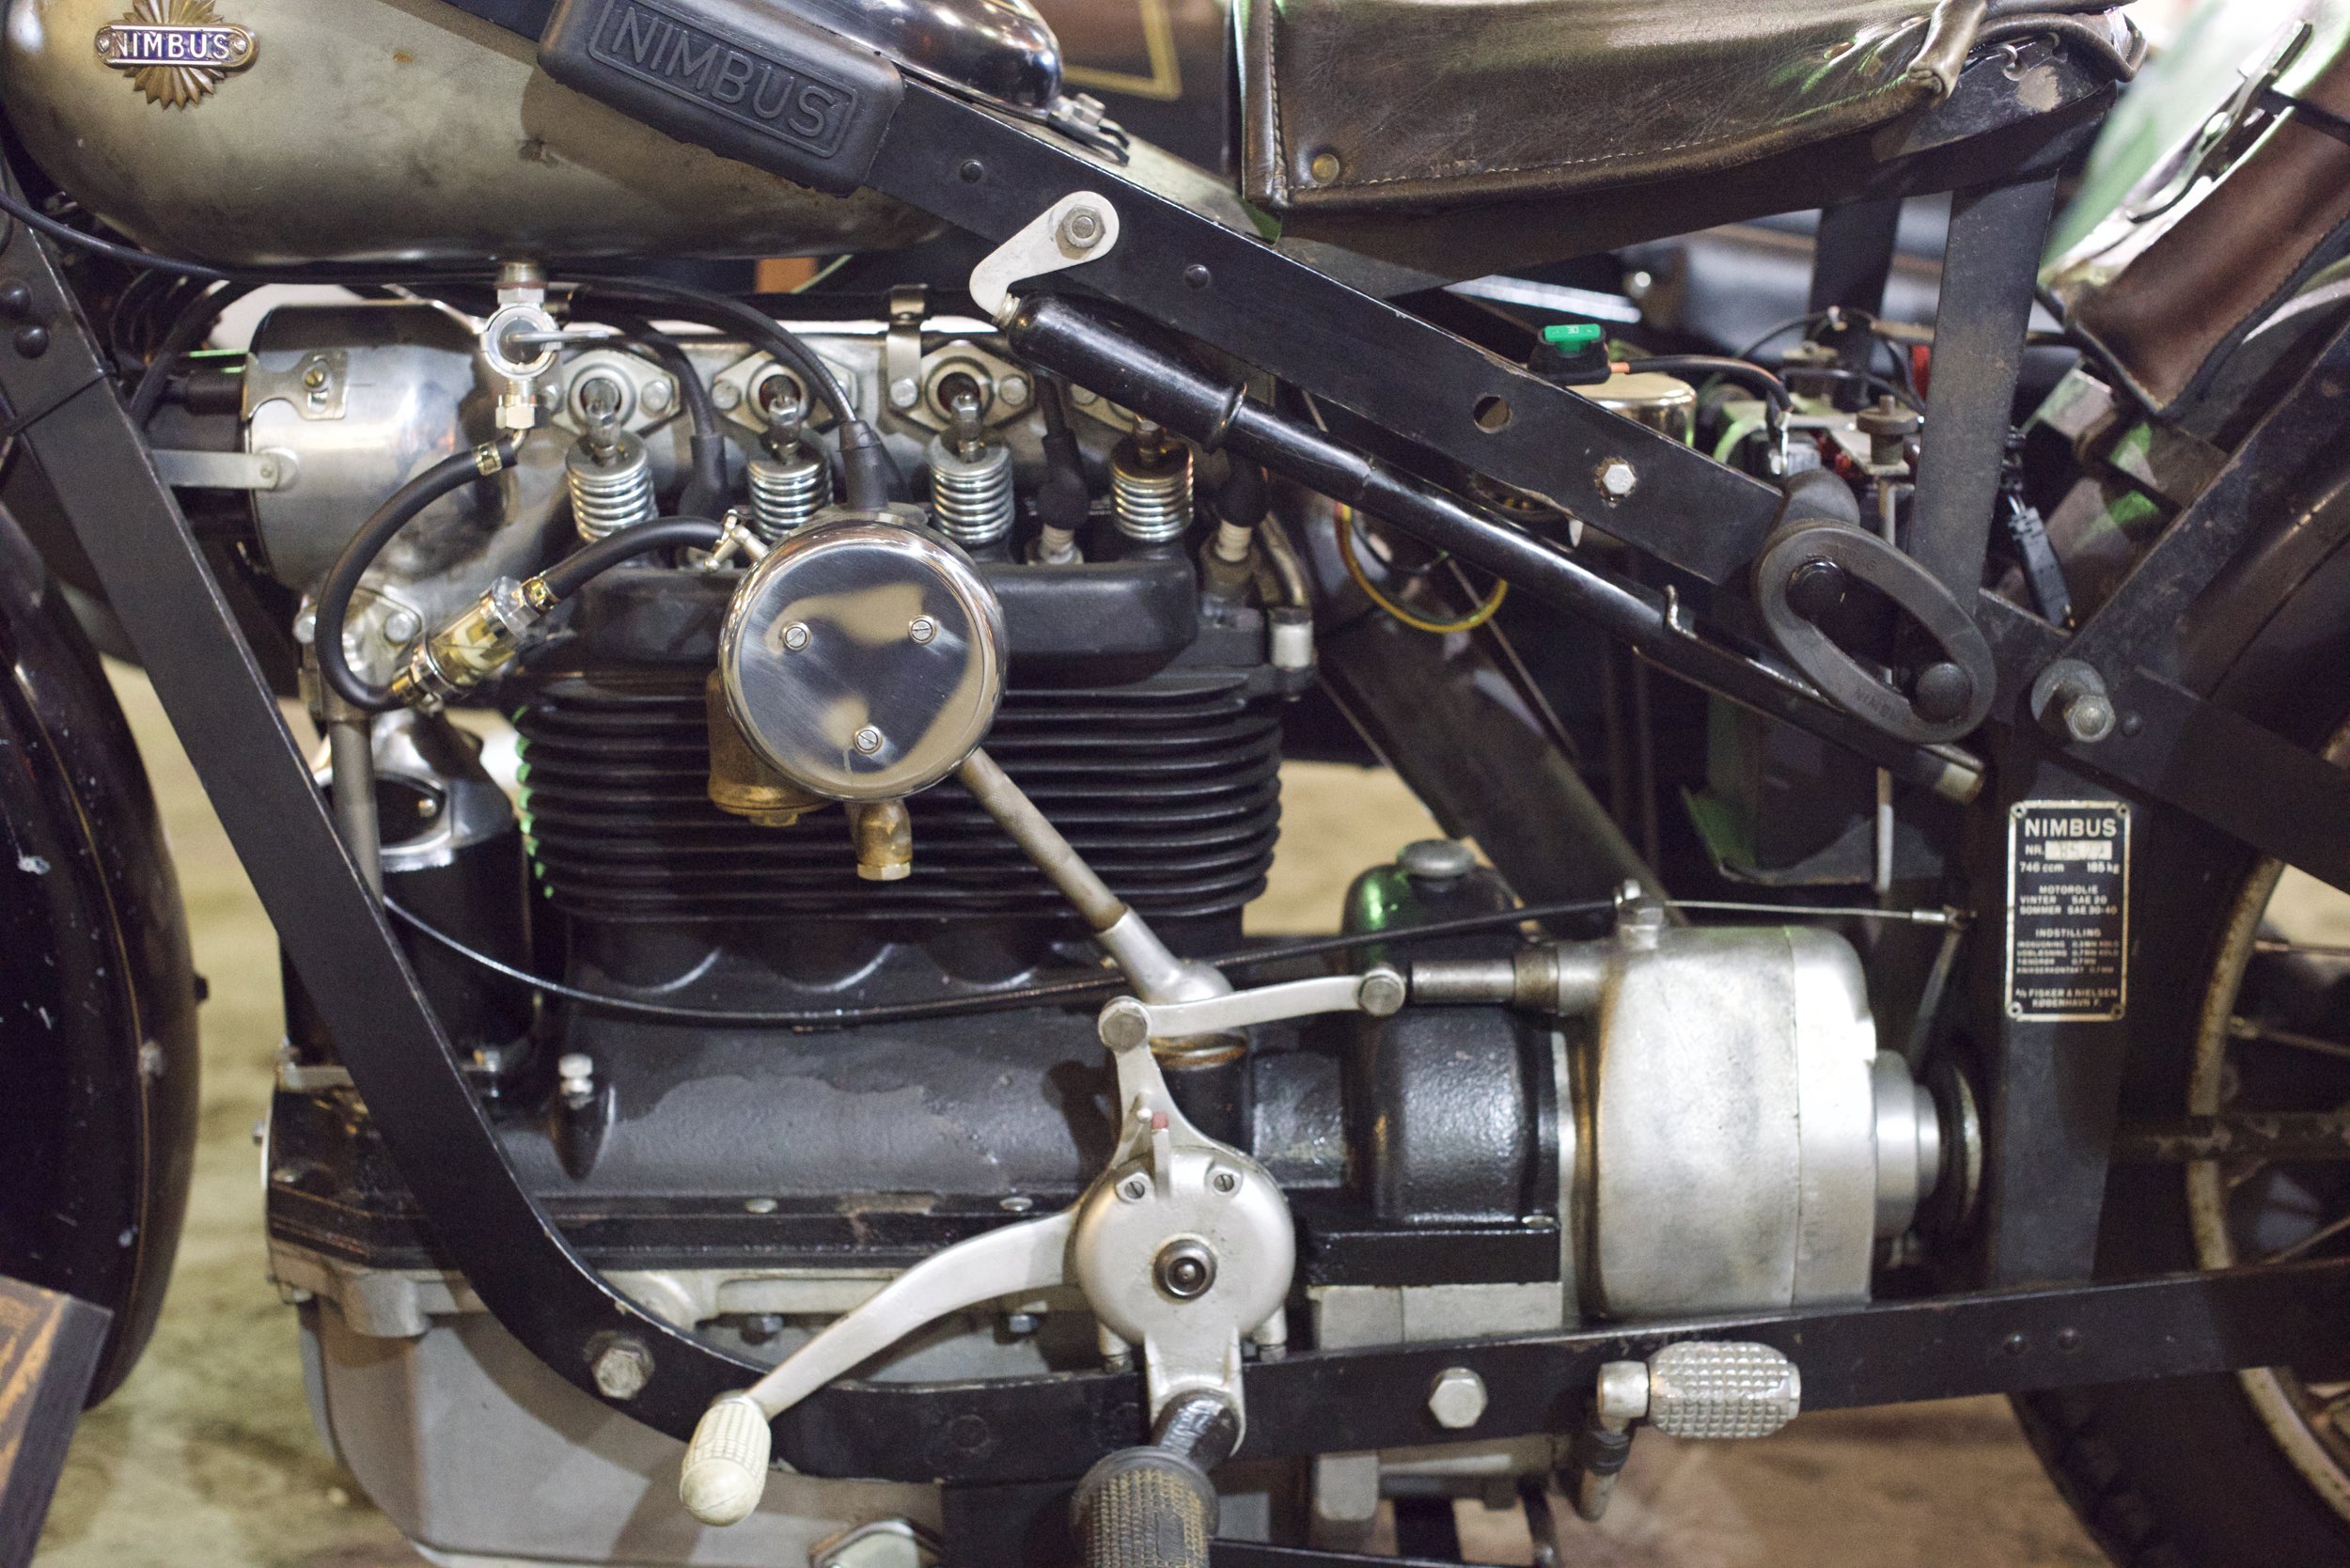  The engine of a pre-war Nimbus four cylinder outfit. 